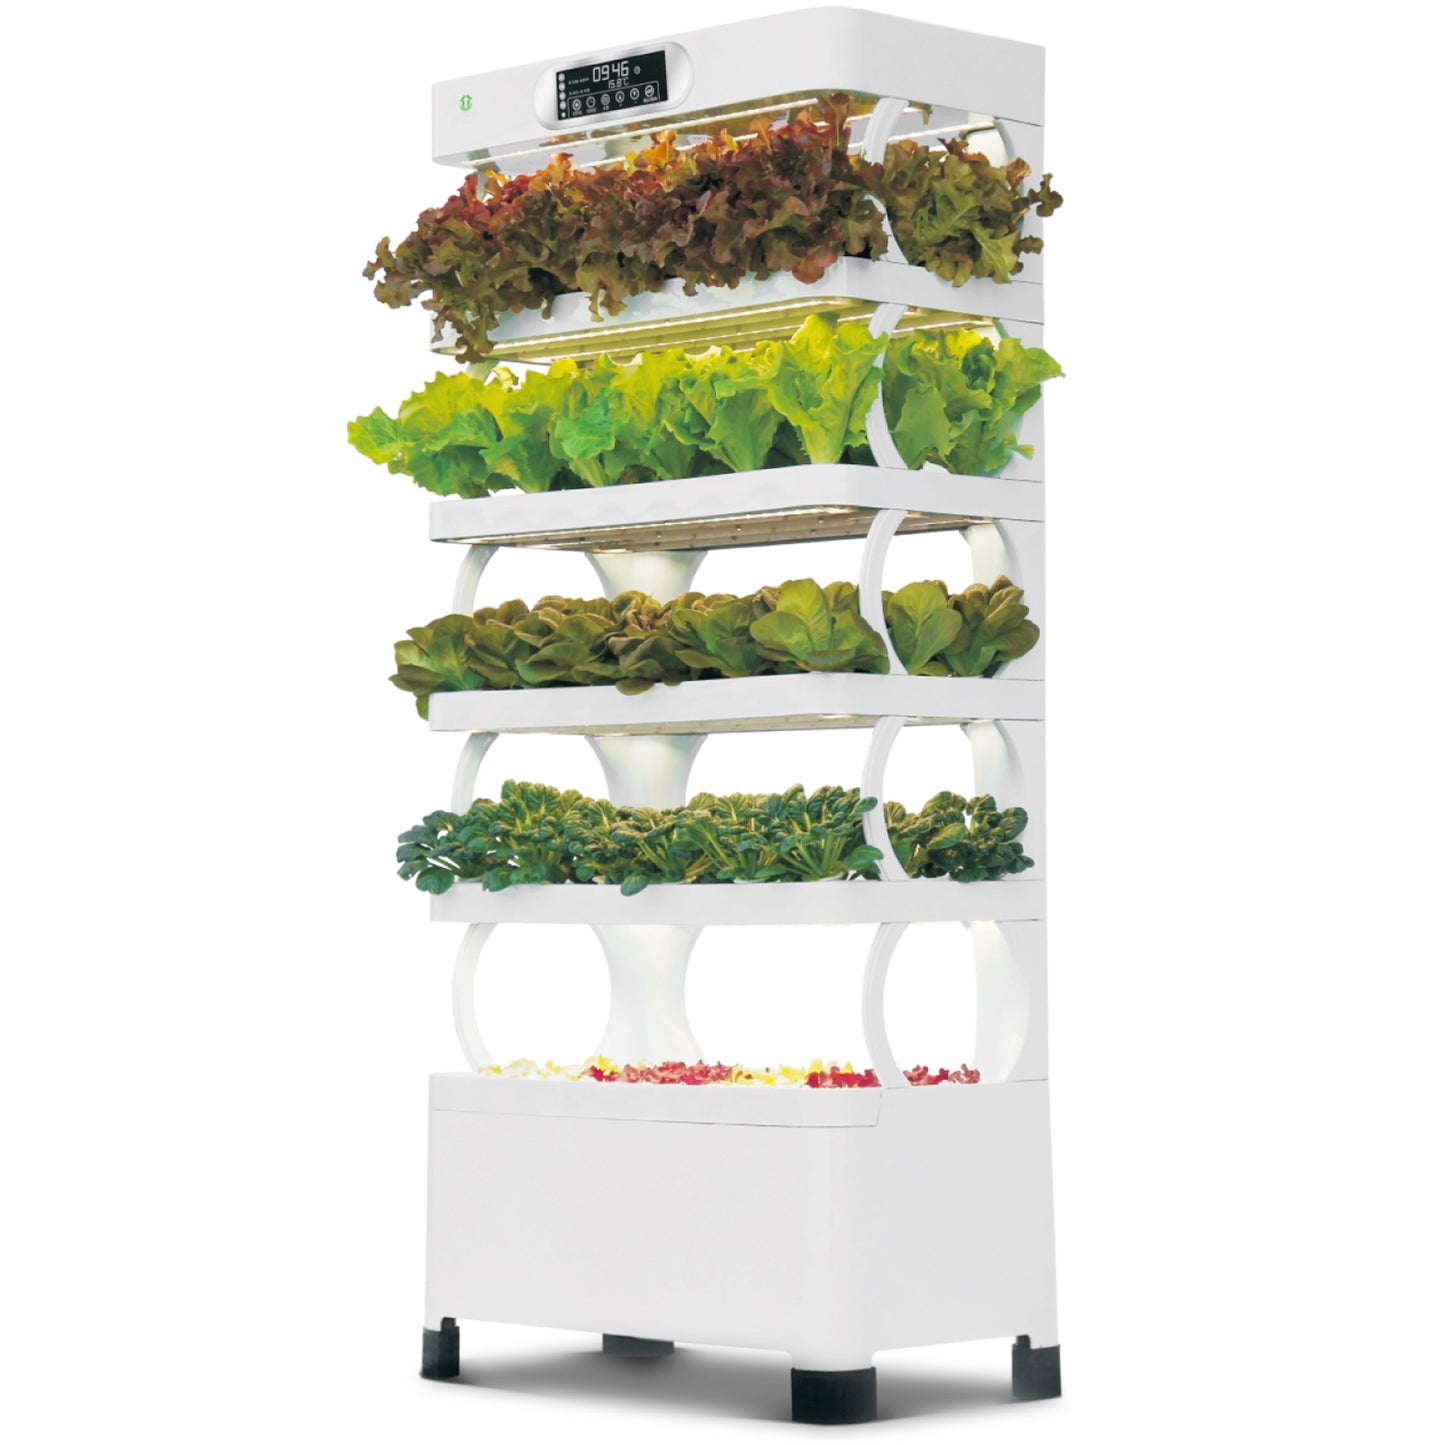 AVUX Hydroponic Growing Tower – A 5 Layers (160 Pots) Freestanding Vertical Growing Aeroponic Garden for Planting, Herbs and Vegetables with Timer, Adapter, Hydrating Pump, Seeding Bed and Net Pots